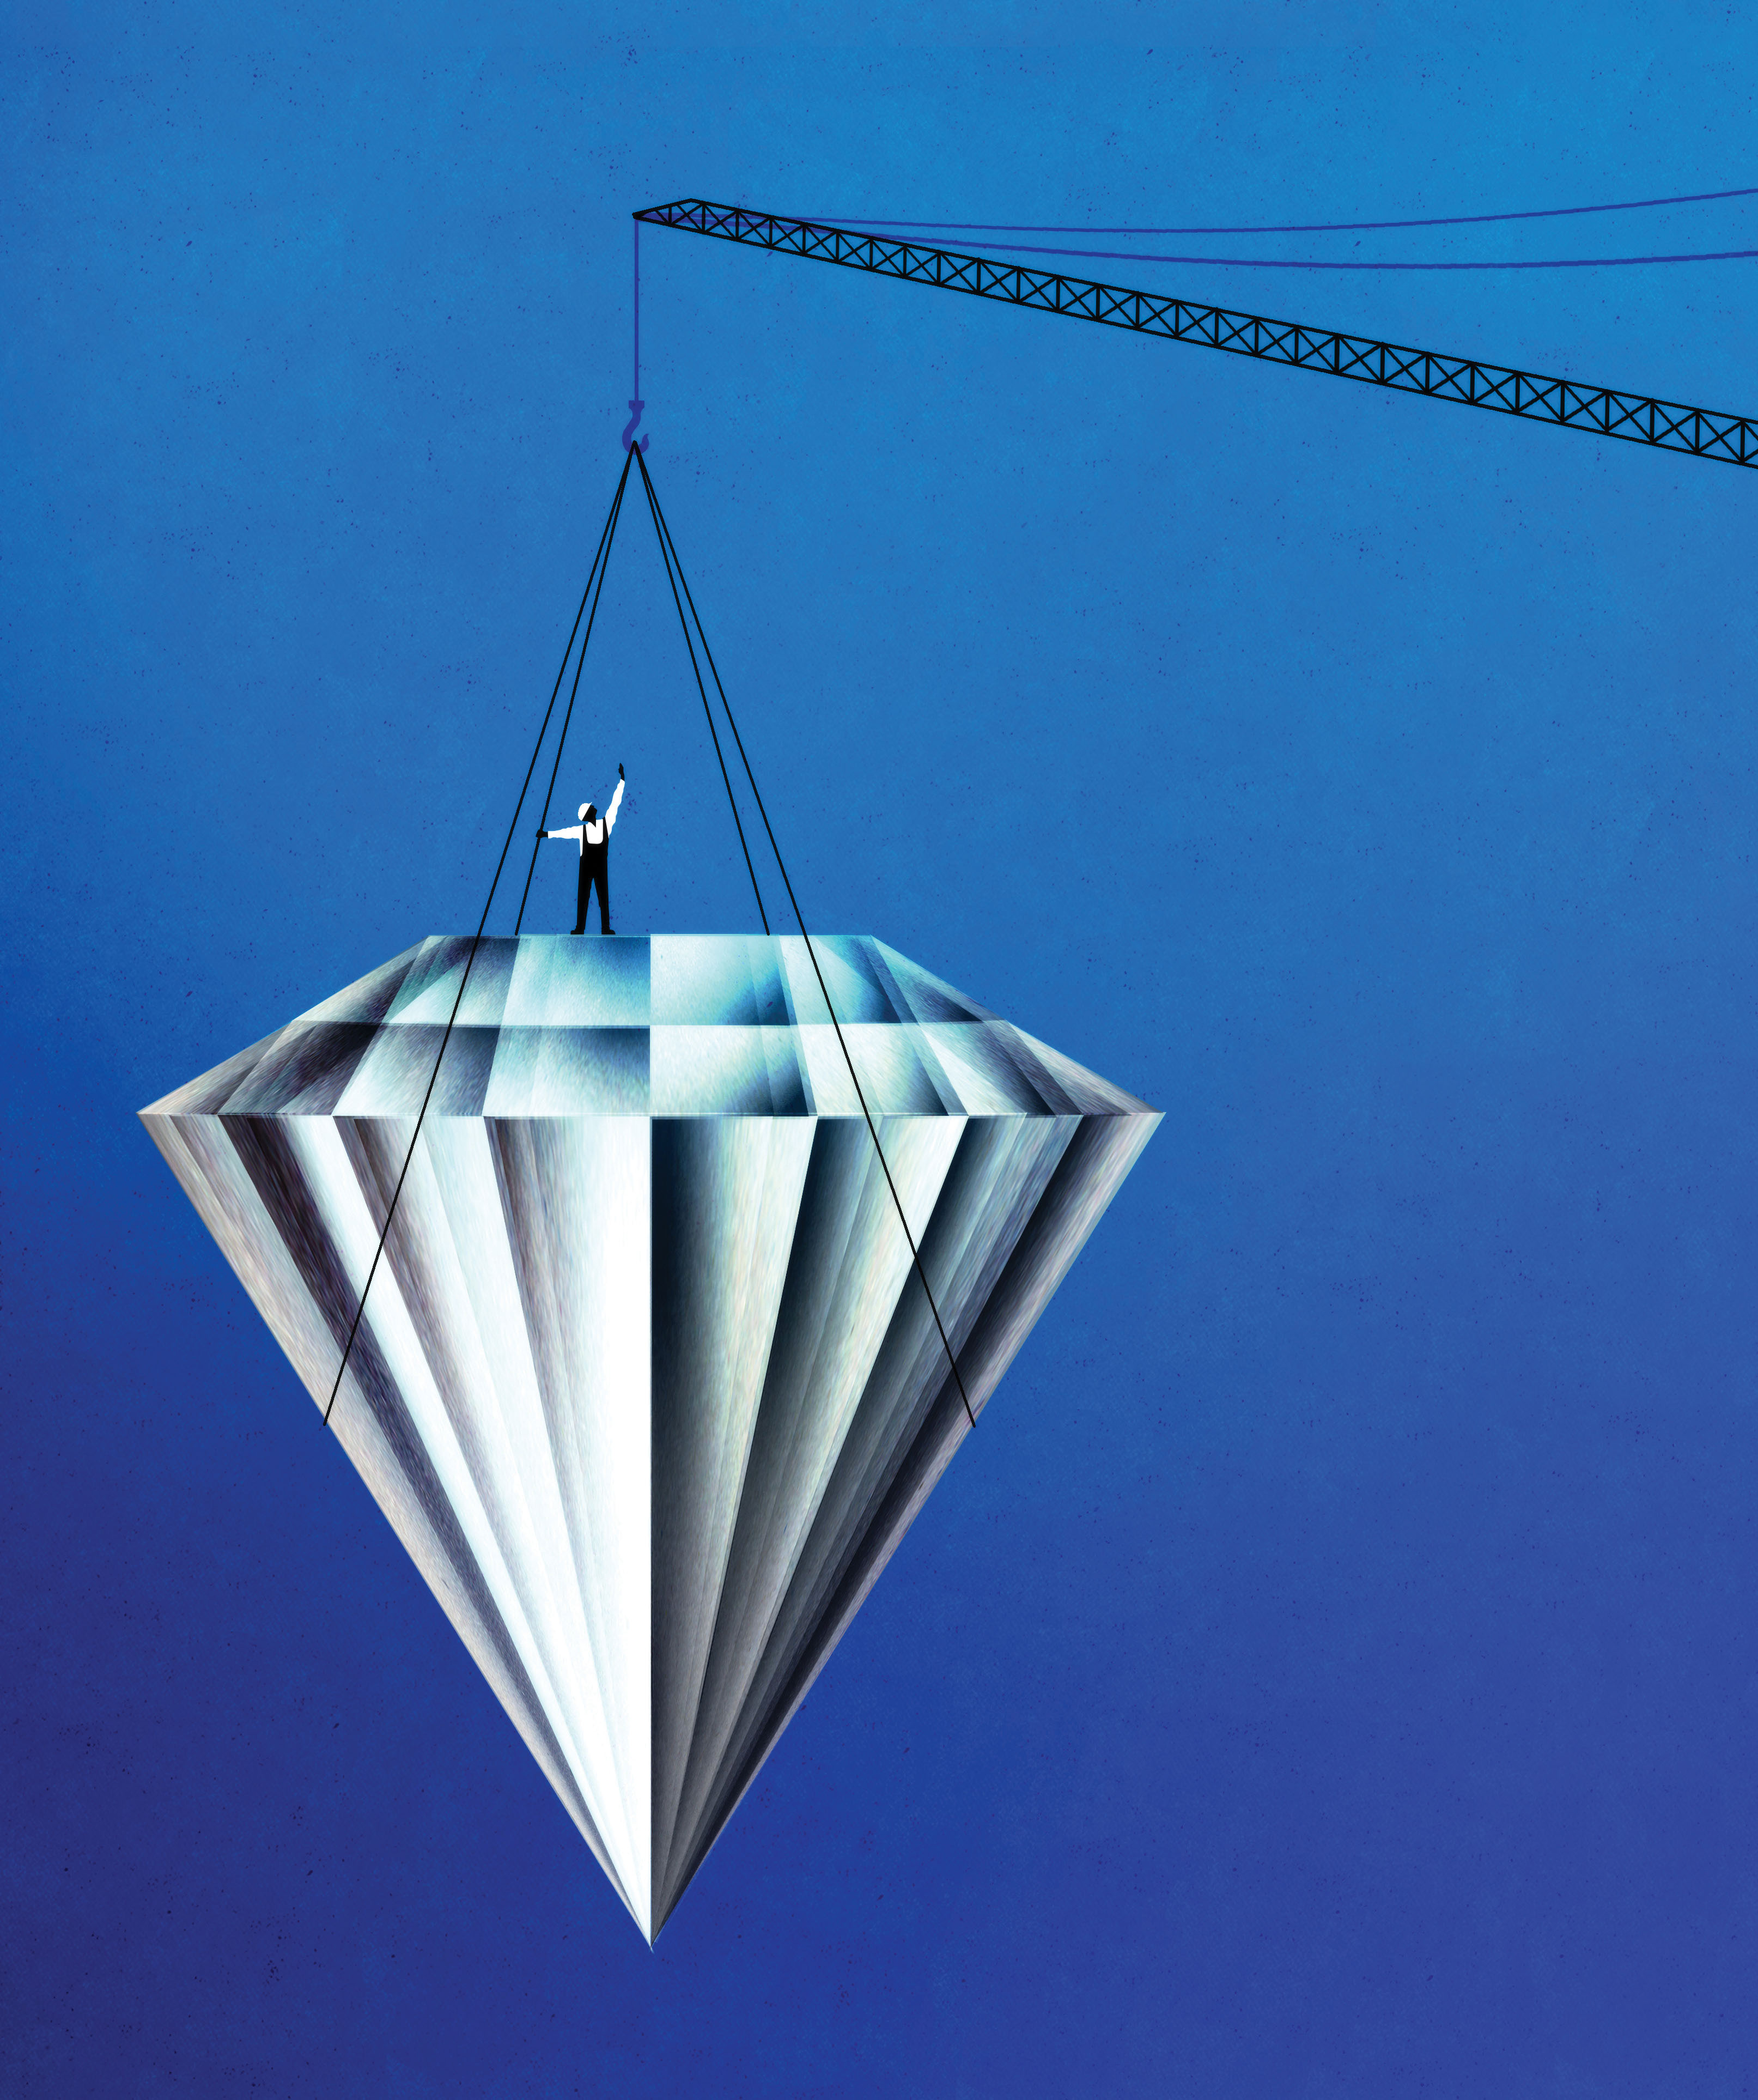 The global gem trade has deep ties to NYC’s real estate industry, which is filled with many who cut their teeth cutting diamonds. (Illustration by Brian Stauffer)